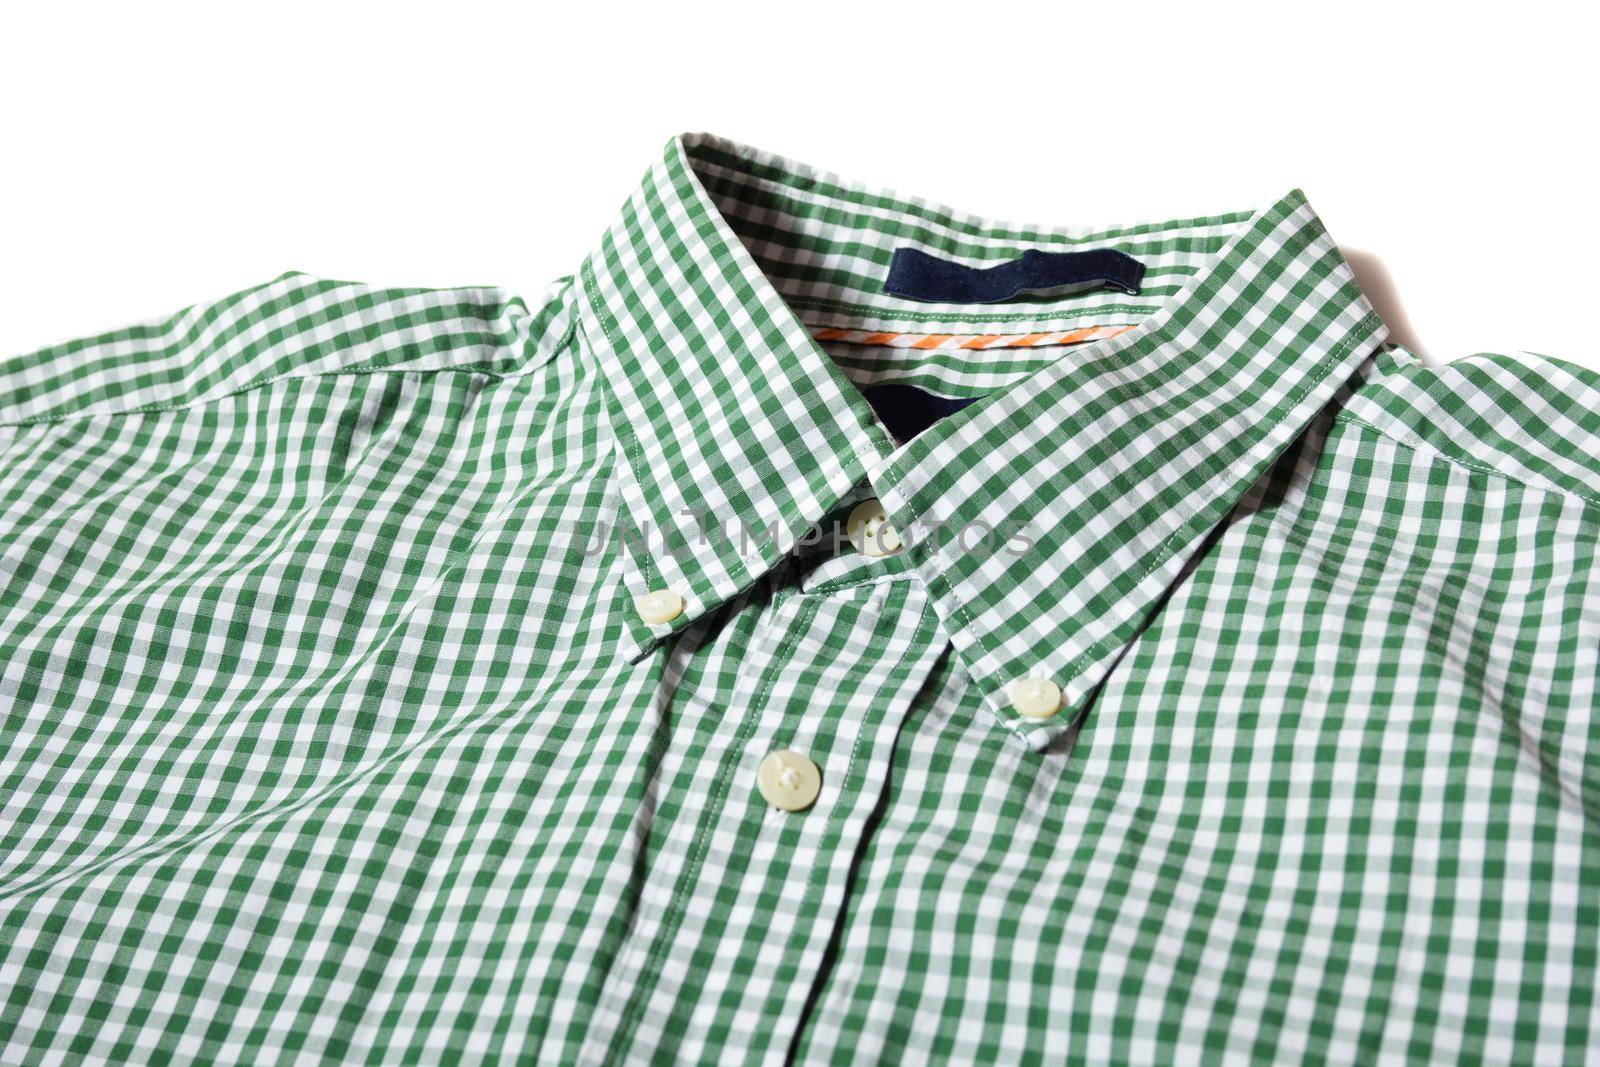 Green men's shirt with button down collar by AigarsR